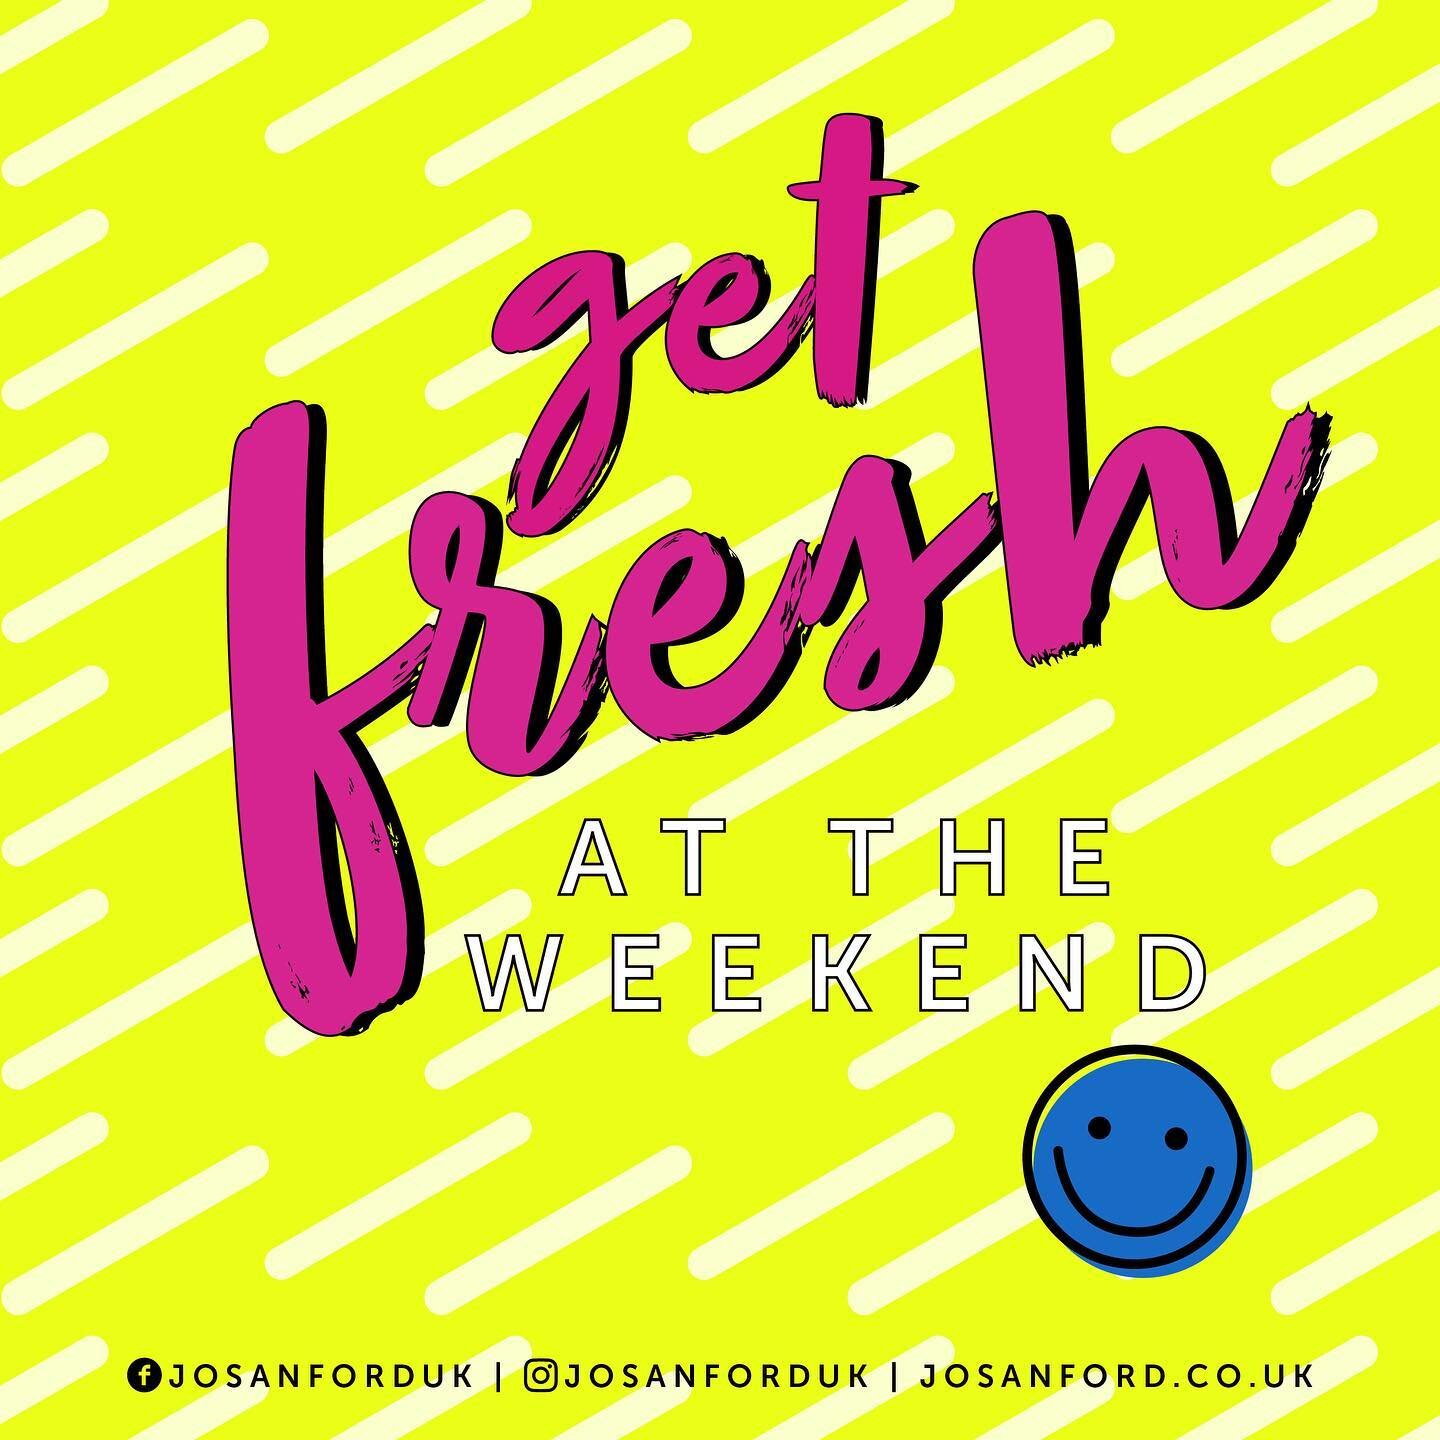 Get Fresh at the weekend! 
I&rsquo;m showing out! Bit of 80s Mel &amp; Kim!
Anyone who knows me, knows my love for 80s music and the joy it brings me!
Hope you all have a joy filled weekend

#josanforduk #happygraphics #getfresh #graphicdesign #colou